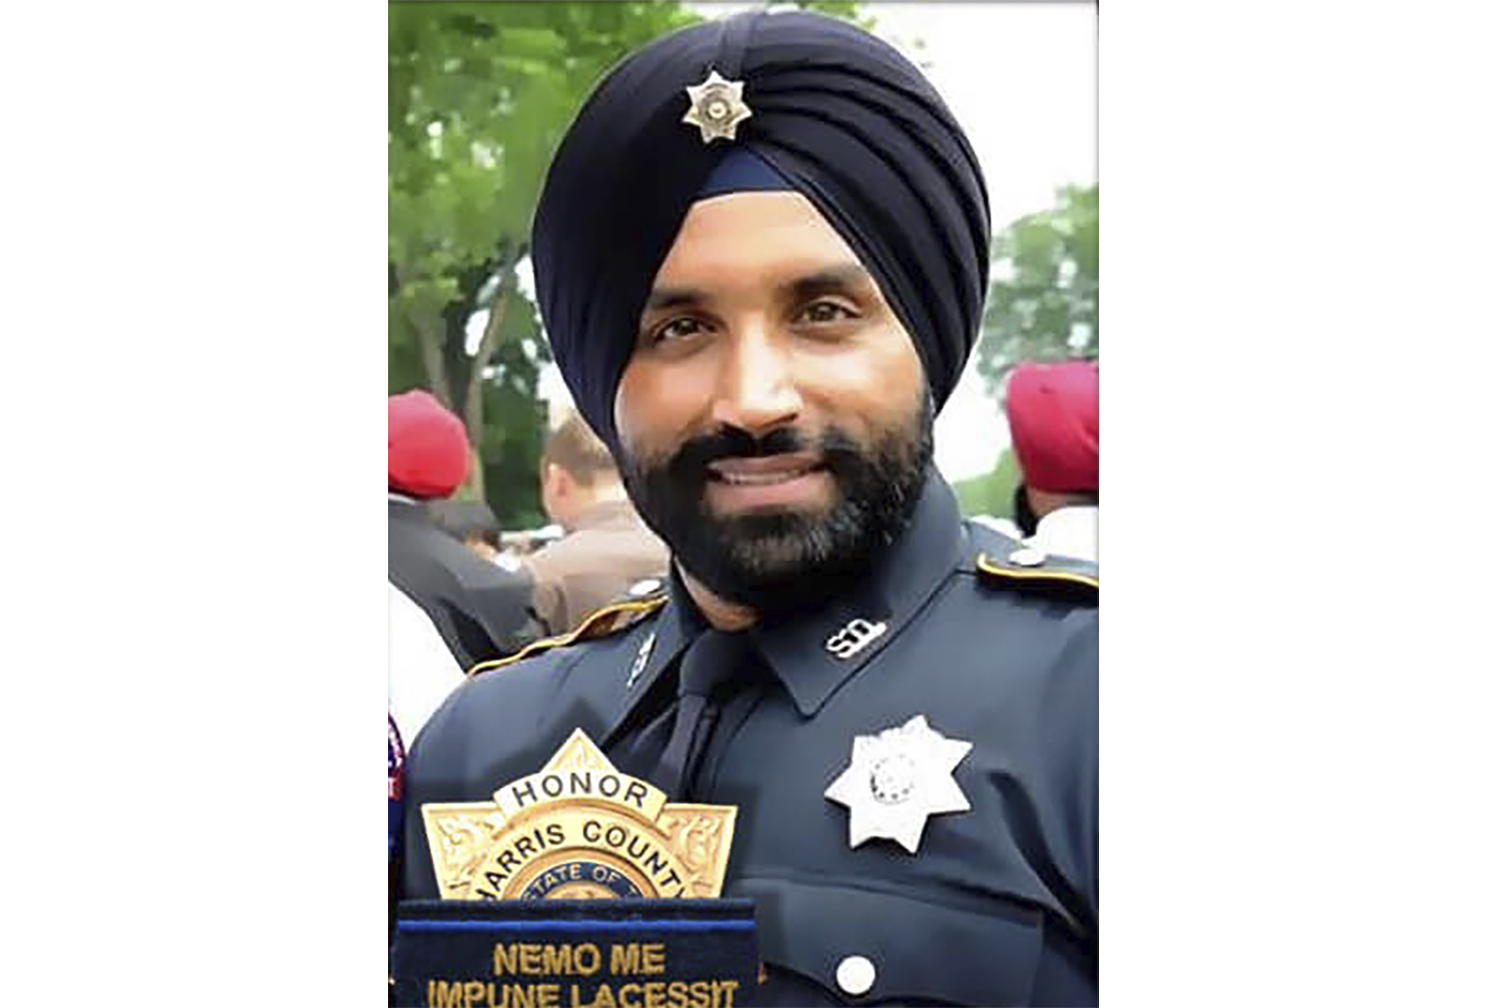 PHOTO: This photo provided by Harris County Sheriff's office shows Deputy Sandeep Dhaliwal. Dhaliwal was shot and killed while making a traffic stop Friday, Sept. 27, 2019 near Houston.